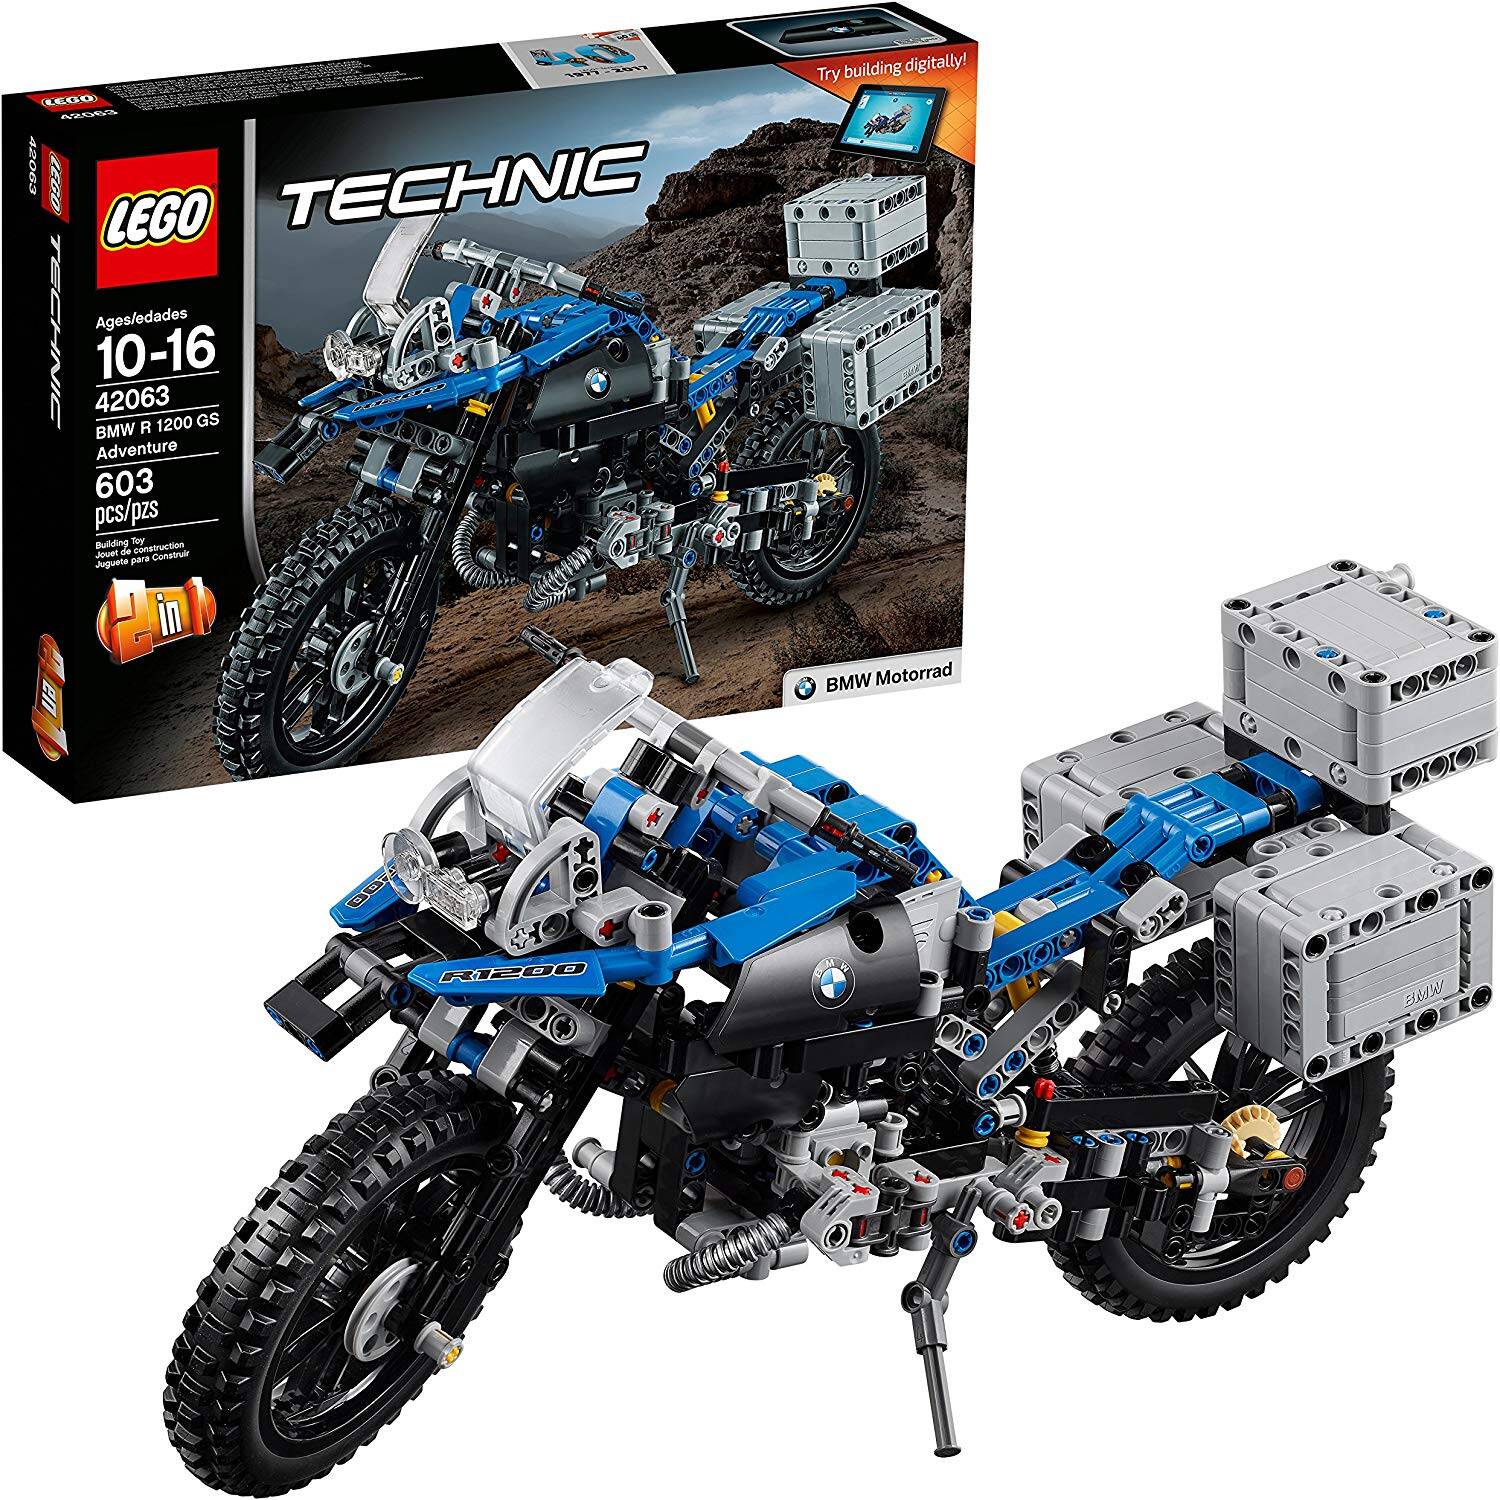 Gift Idea Geek | 27 Best Lego Technic Sets of All Time by Popularity